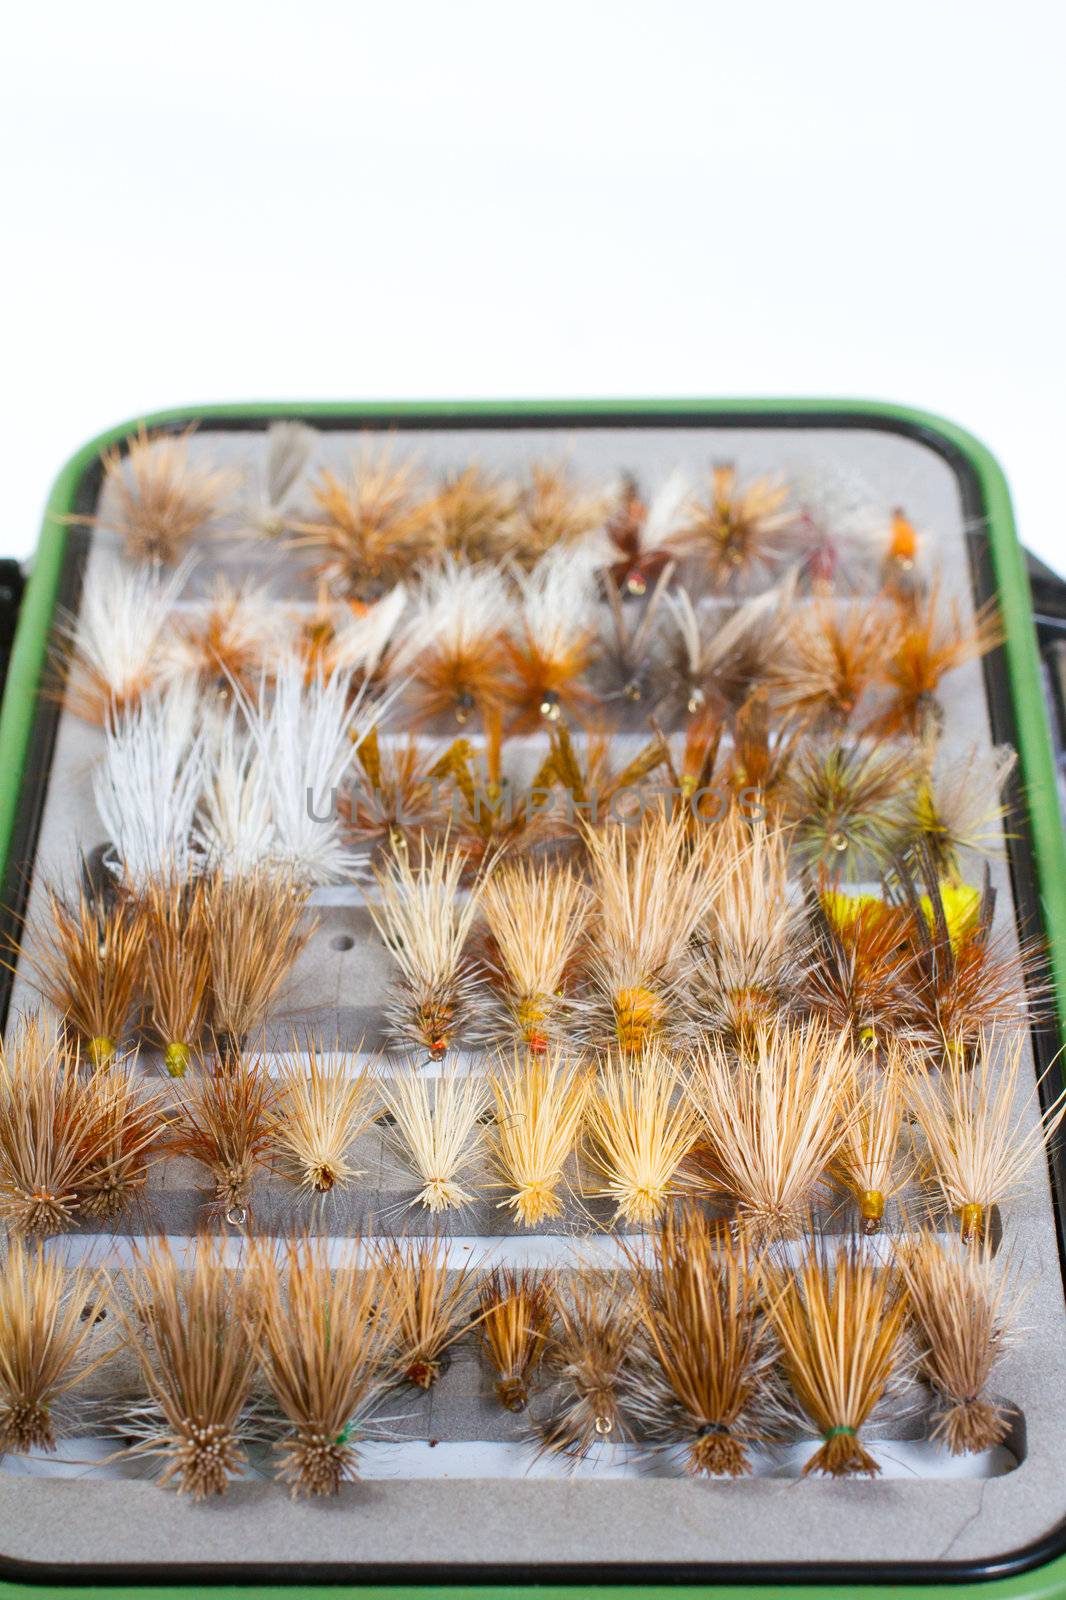 Fly Box Detail Dry Flies by joshuaraineyphotography